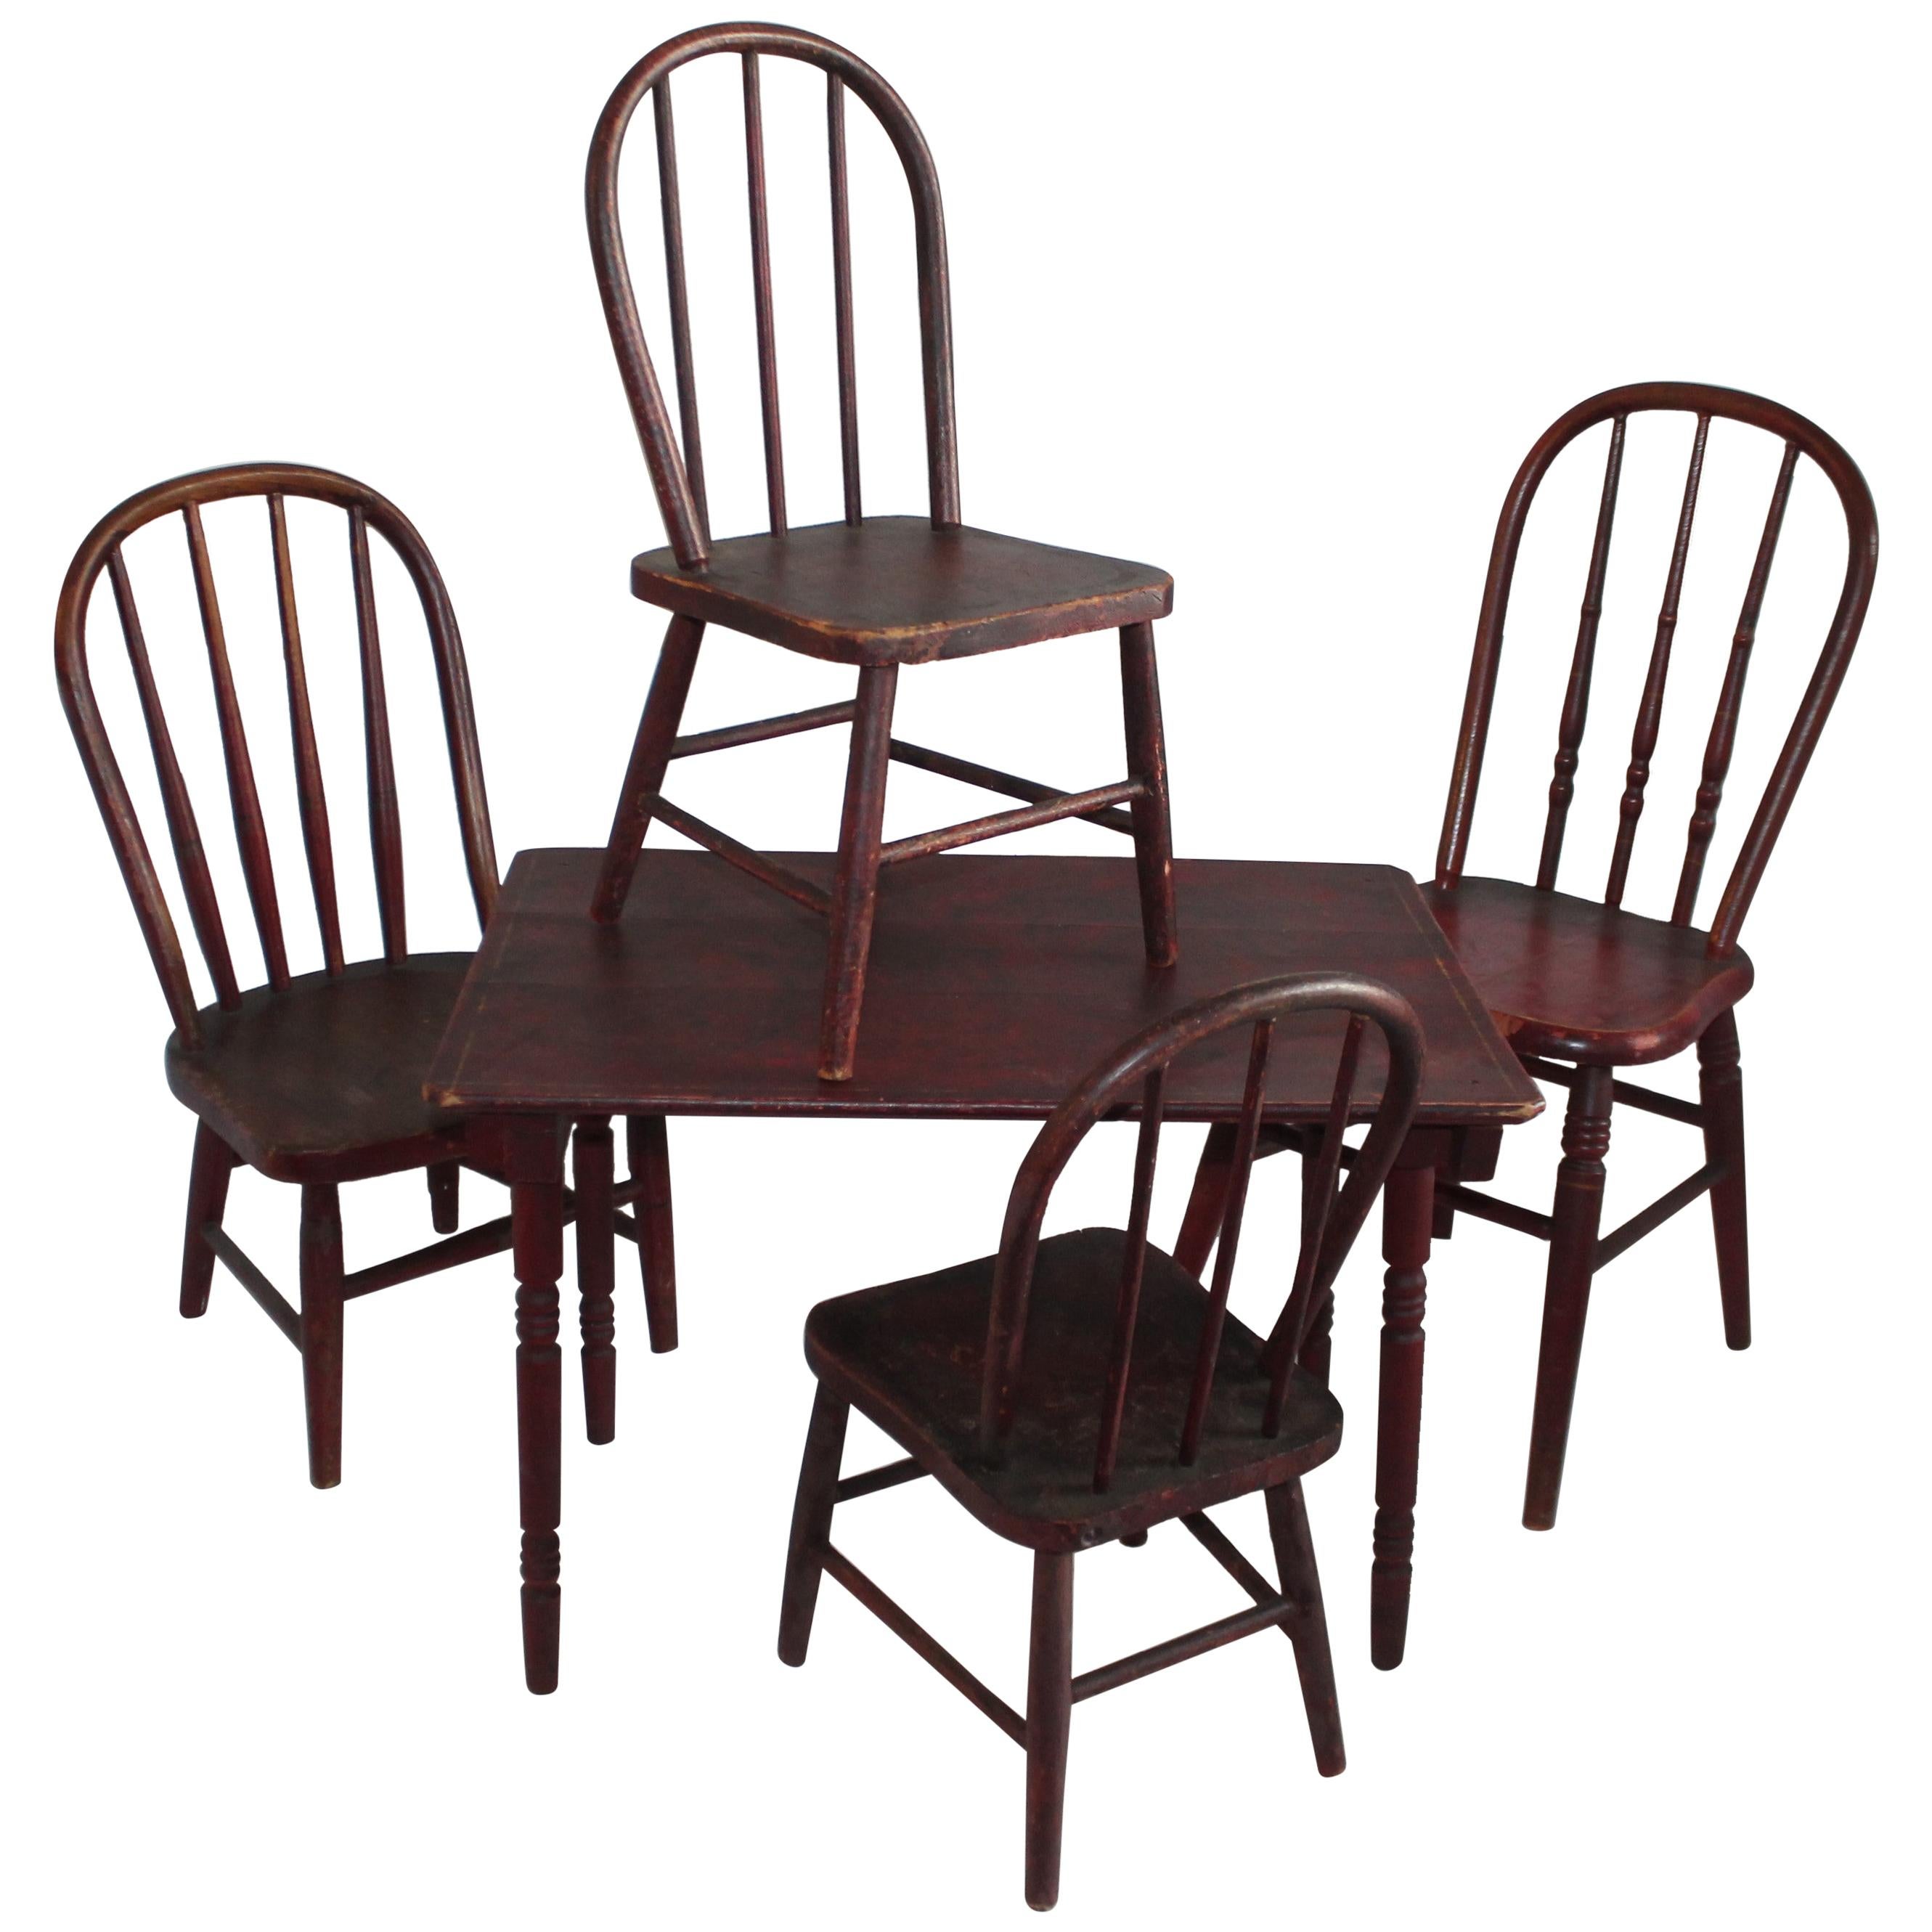 19th Century Original Red Painted Children's Table and Collection of Four Chairs